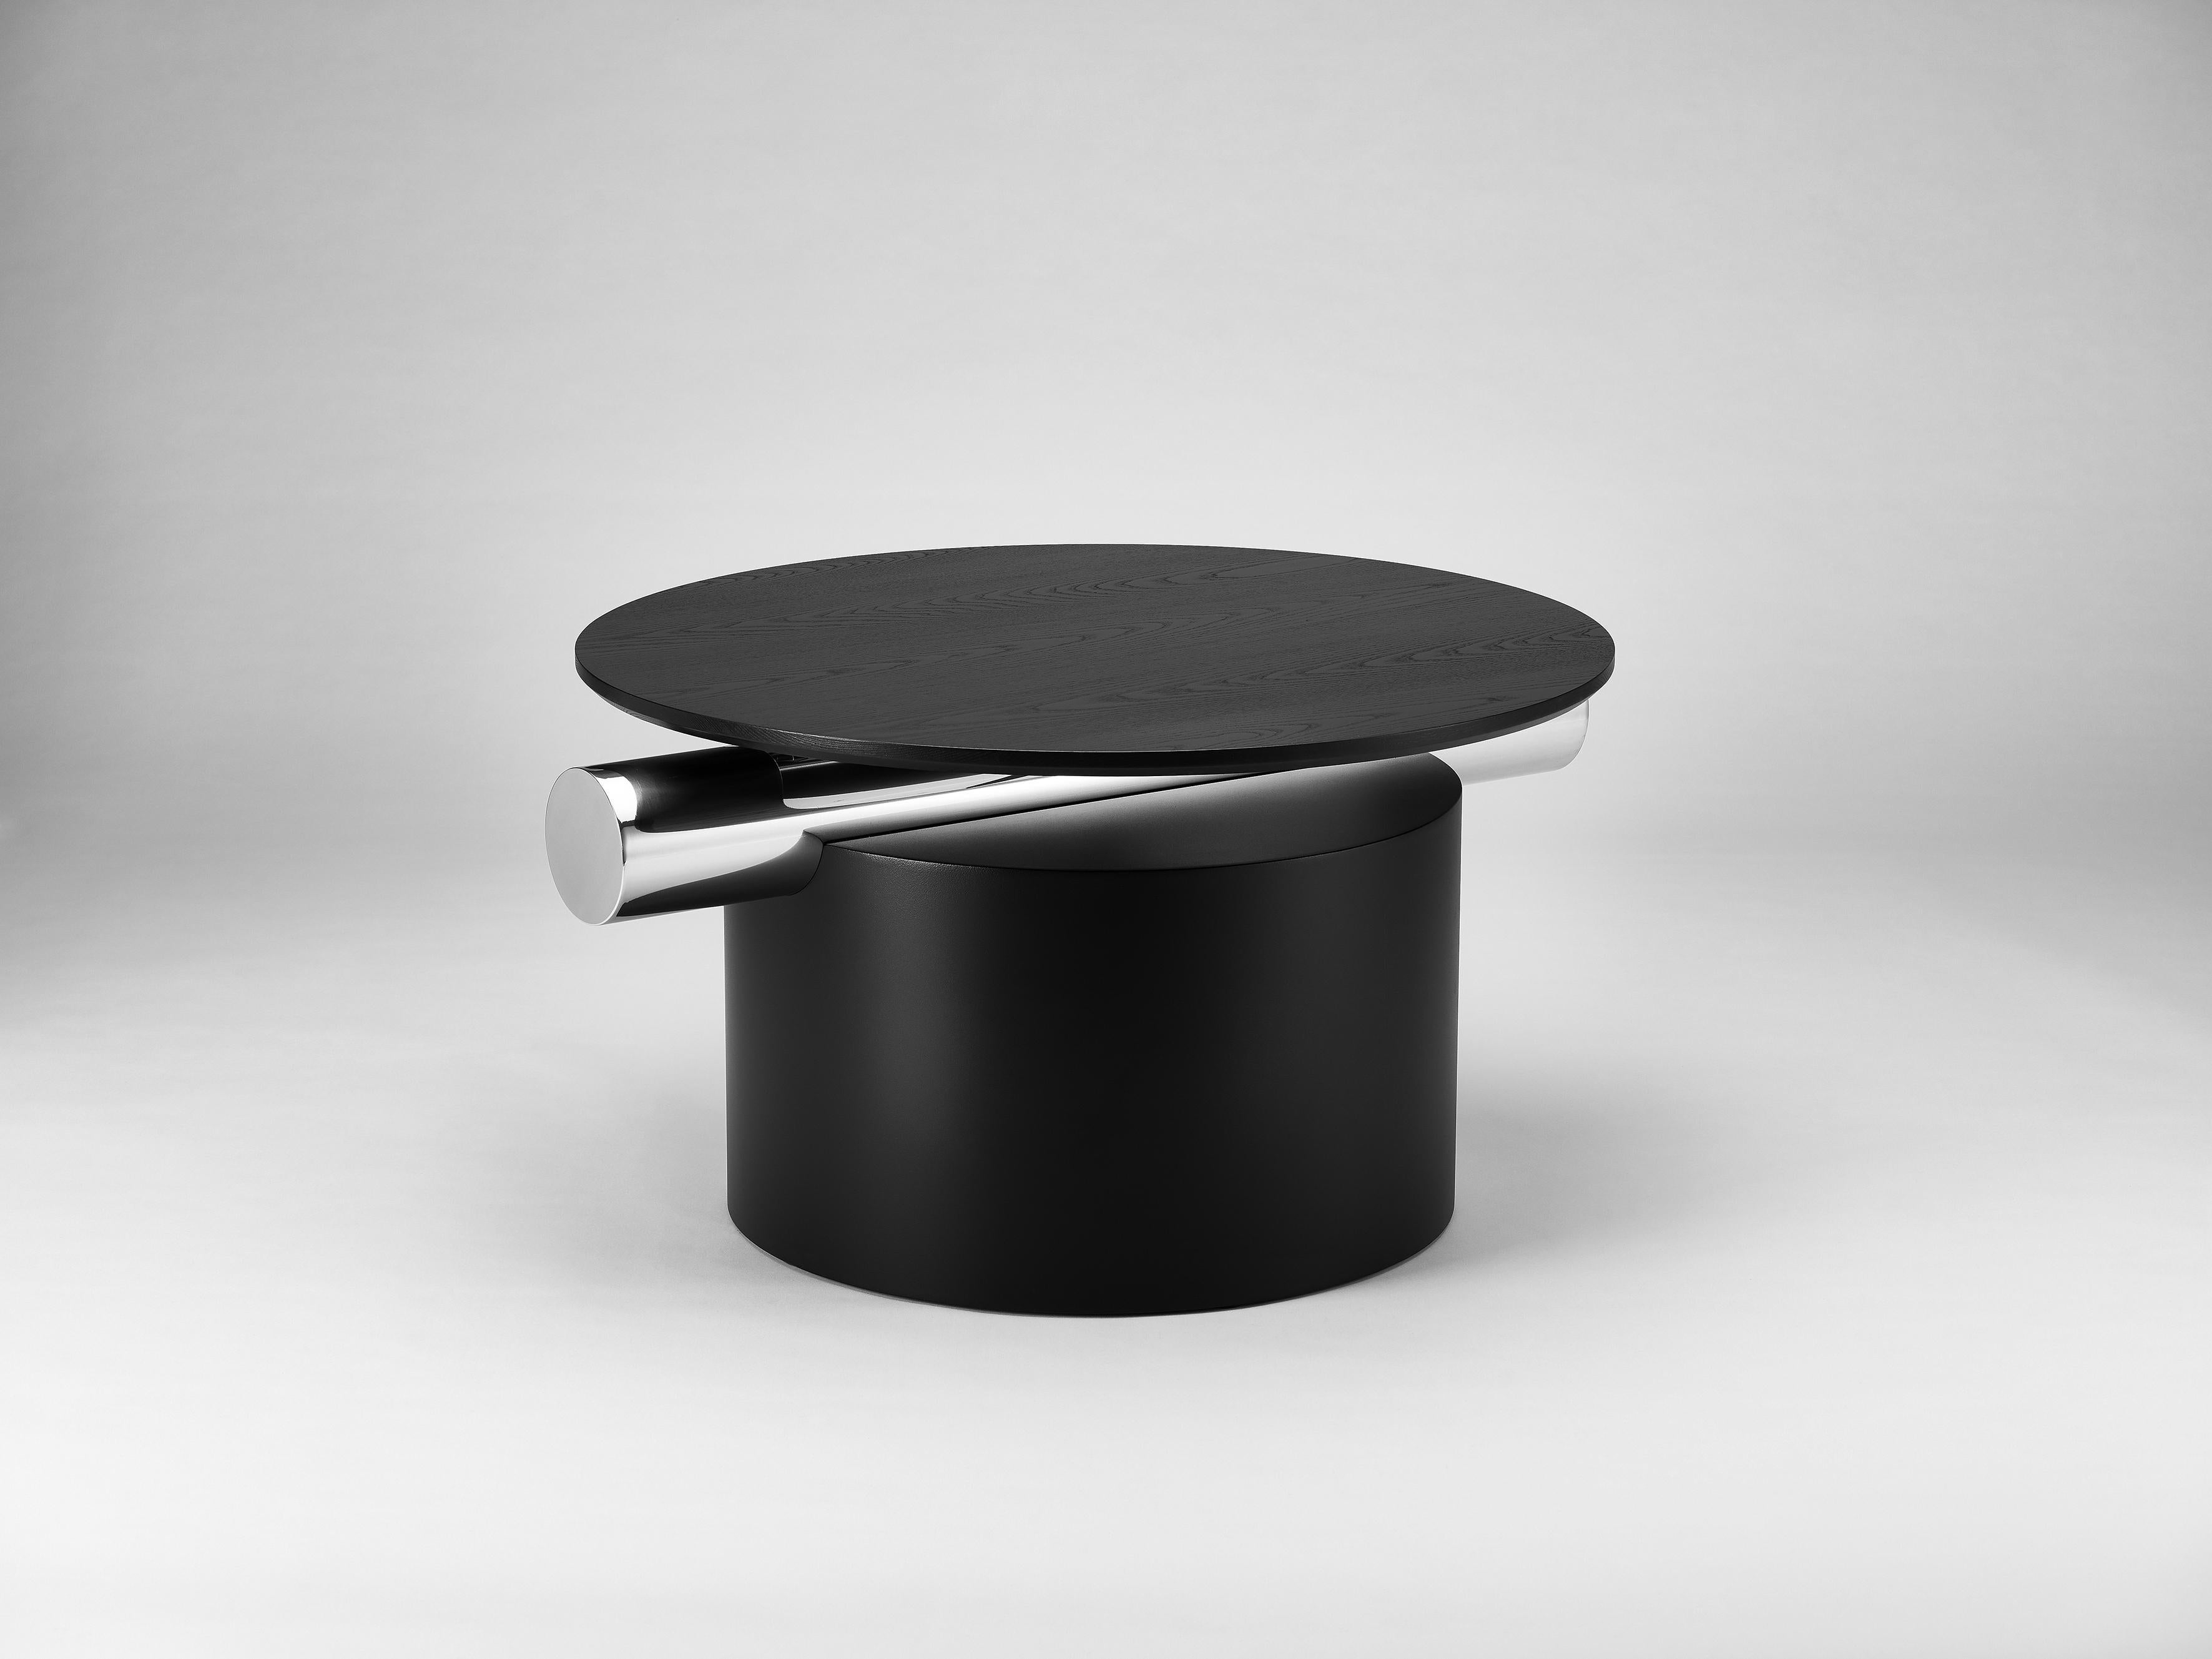 Heritage Layer Round Table by Lee Jung Hoon
Dimensions: D 78 x W 88 x H 44.1 cm
Materials: Steel, Ash, Stainless Steel.

The Heritage series, created by designer Lee Jung-hoon is a collection of sculptural modern furniture. The designs are inspired